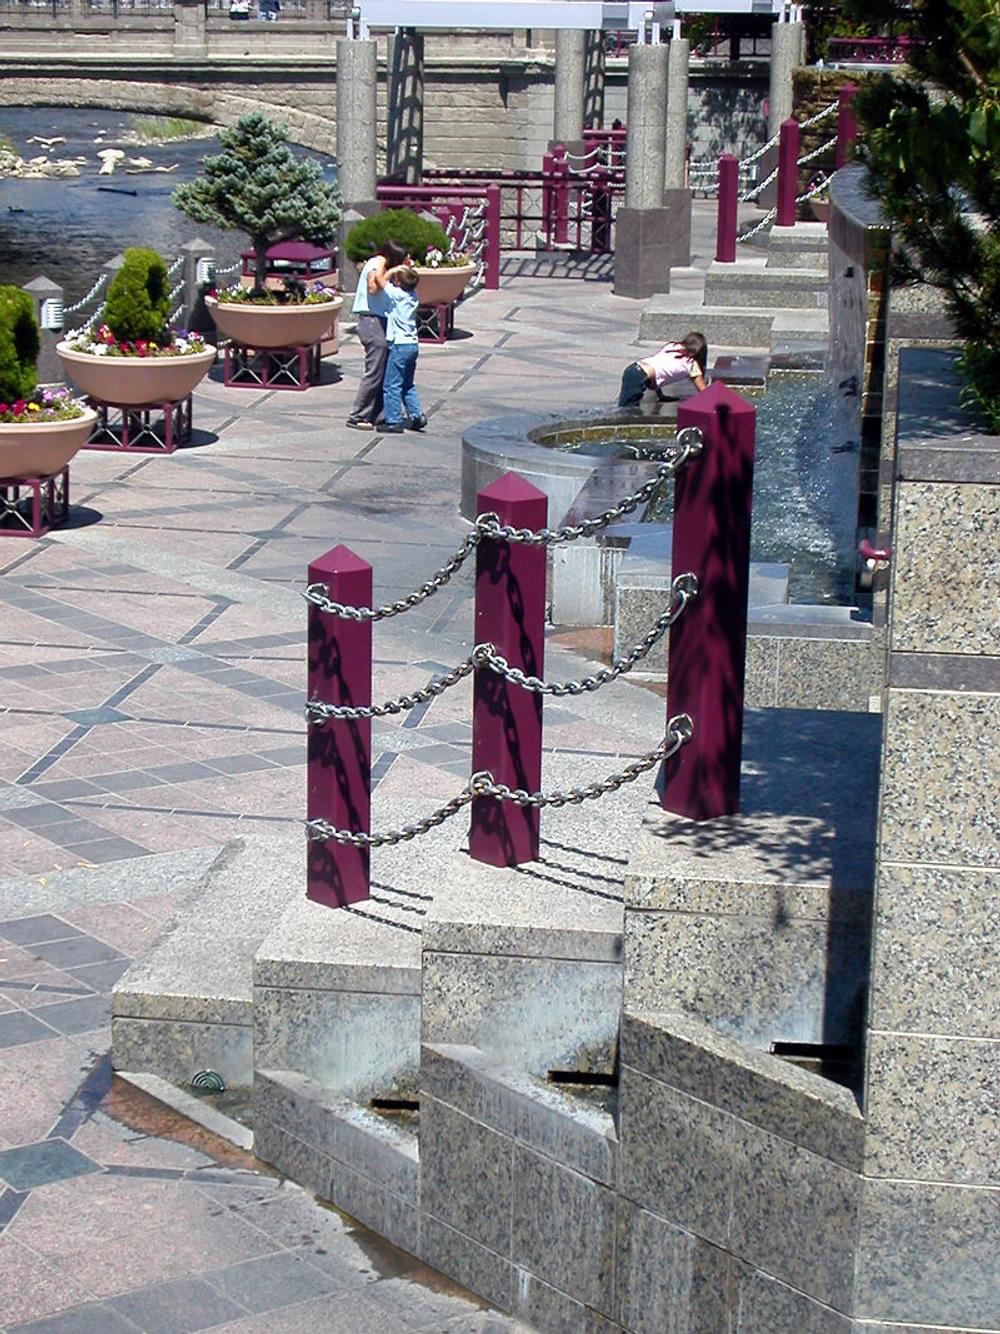 Highly structured trail and urban park featues along the embankment of the Truckee River in downtown Reno, Nevada 